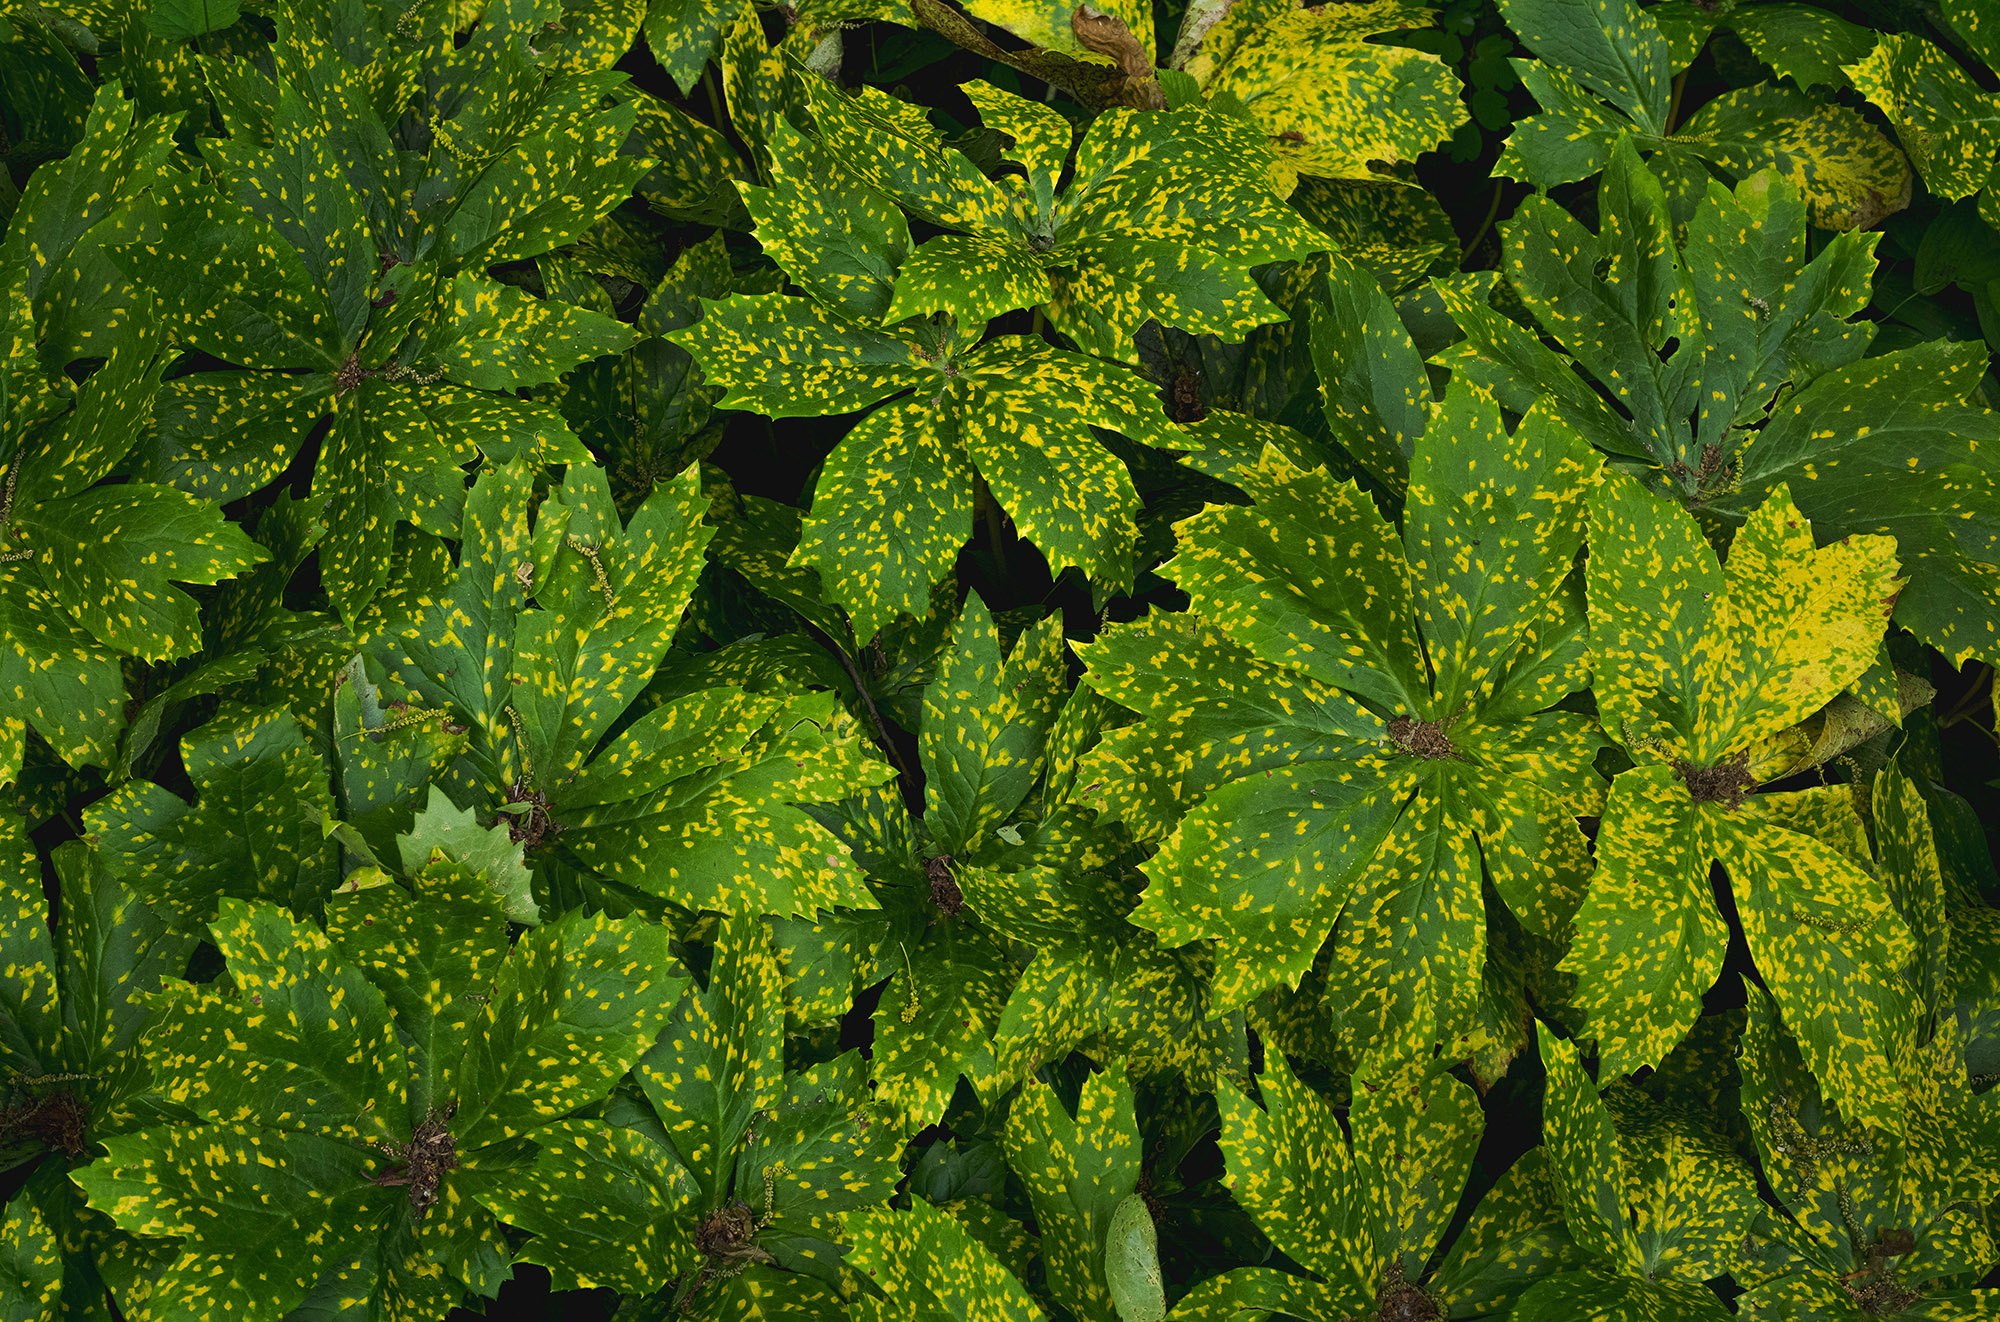 Many star-shaped green leaves speckled with yellow patterning